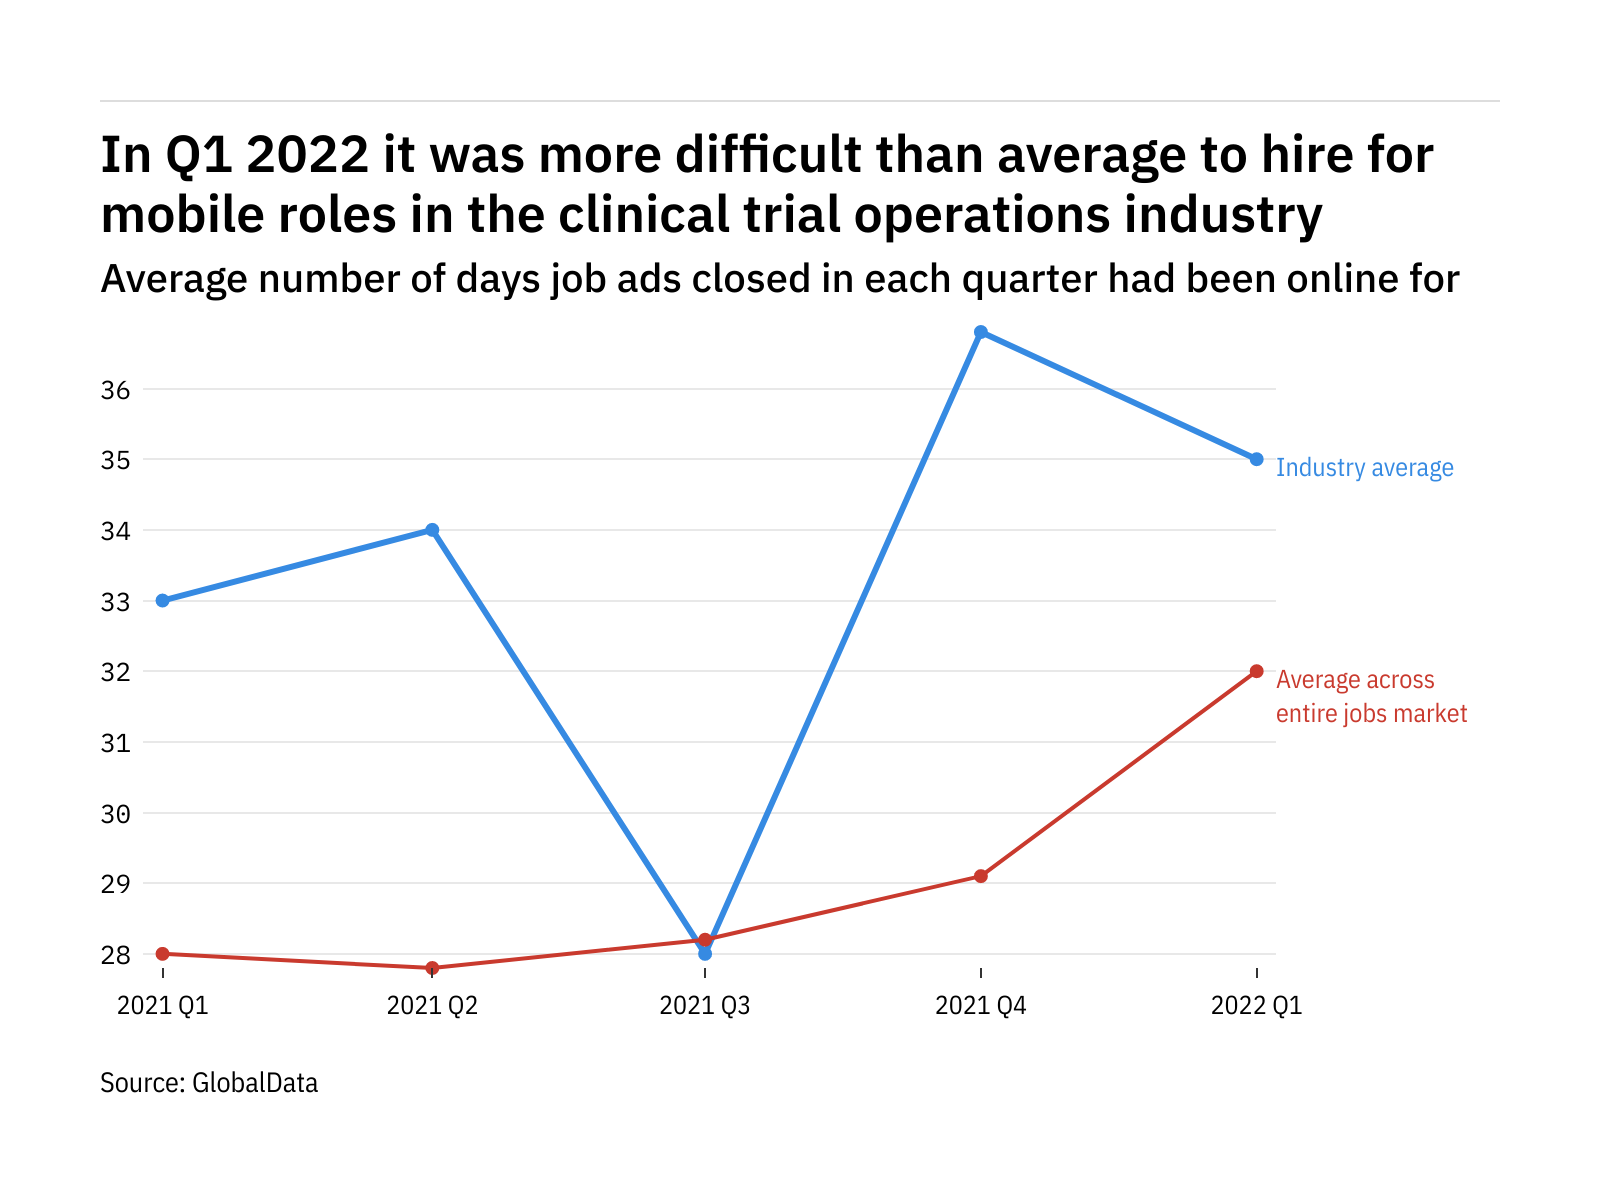 Clinical trial operations found it harder to fill mobile vacancies in Q1 2022